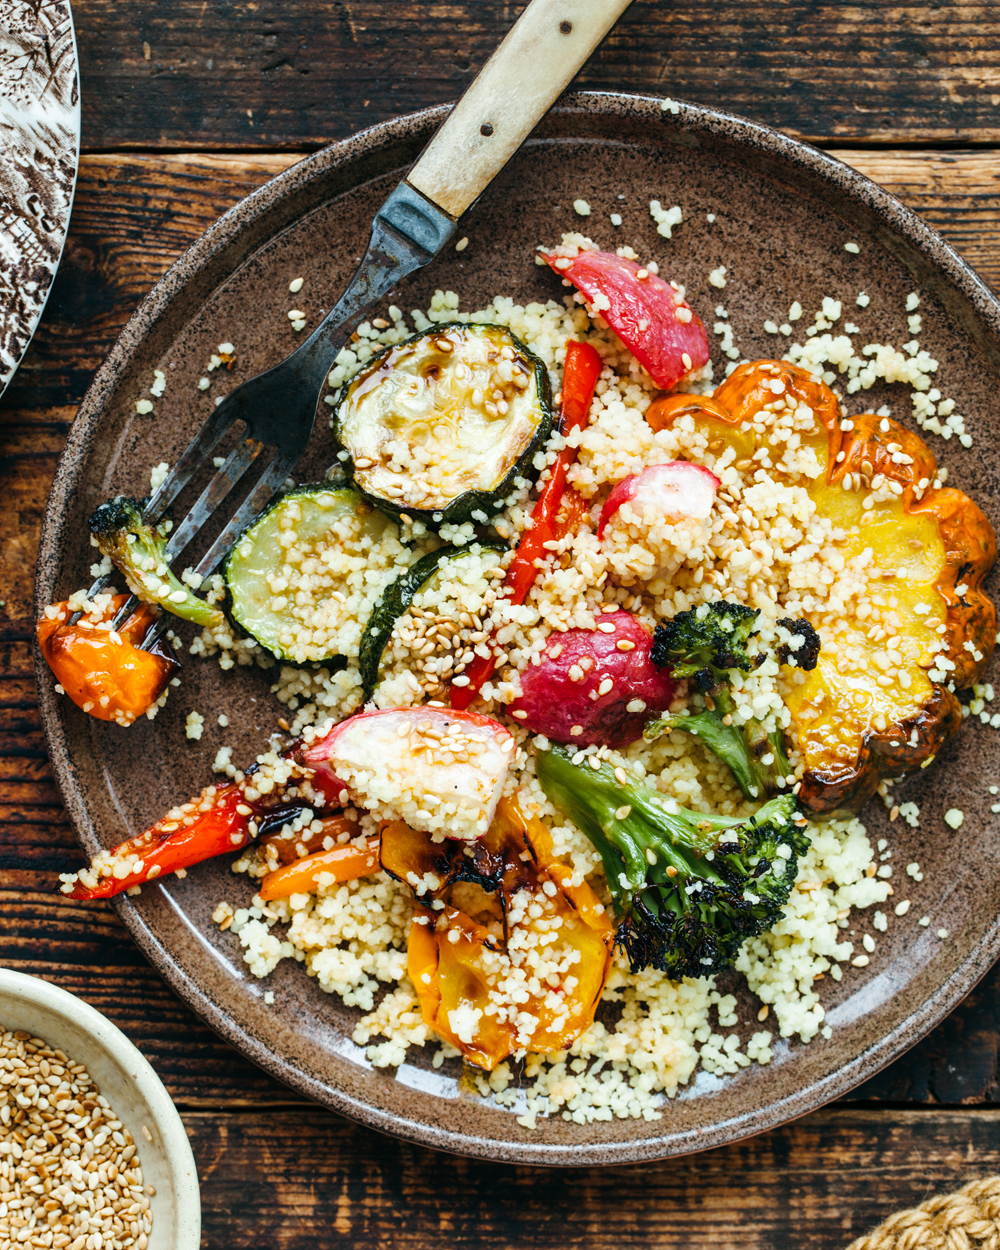 Roasted Vegetables with Couscous and Sesame Dressing